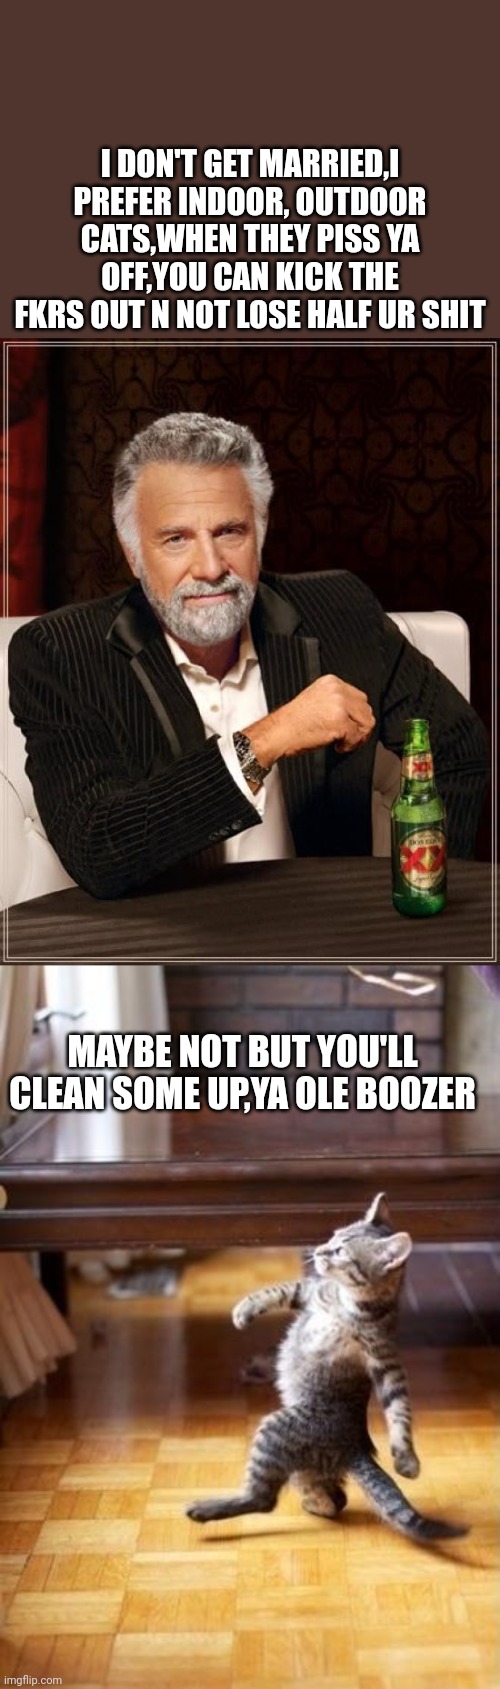 I DON'T GET MARRIED,I PREFER INDOOR, OUTDOOR CATS,WHEN THEY PISS YA OFF,YOU CAN KICK THE FKRS OUT N NOT LOSE HALF UR SHIT; MAYBE NOT BUT YOU'LL CLEAN SOME UP,YA OLE BOOZER | image tagged in memes,the most interesting man in the world,cool cat stroll | made w/ Imgflip meme maker